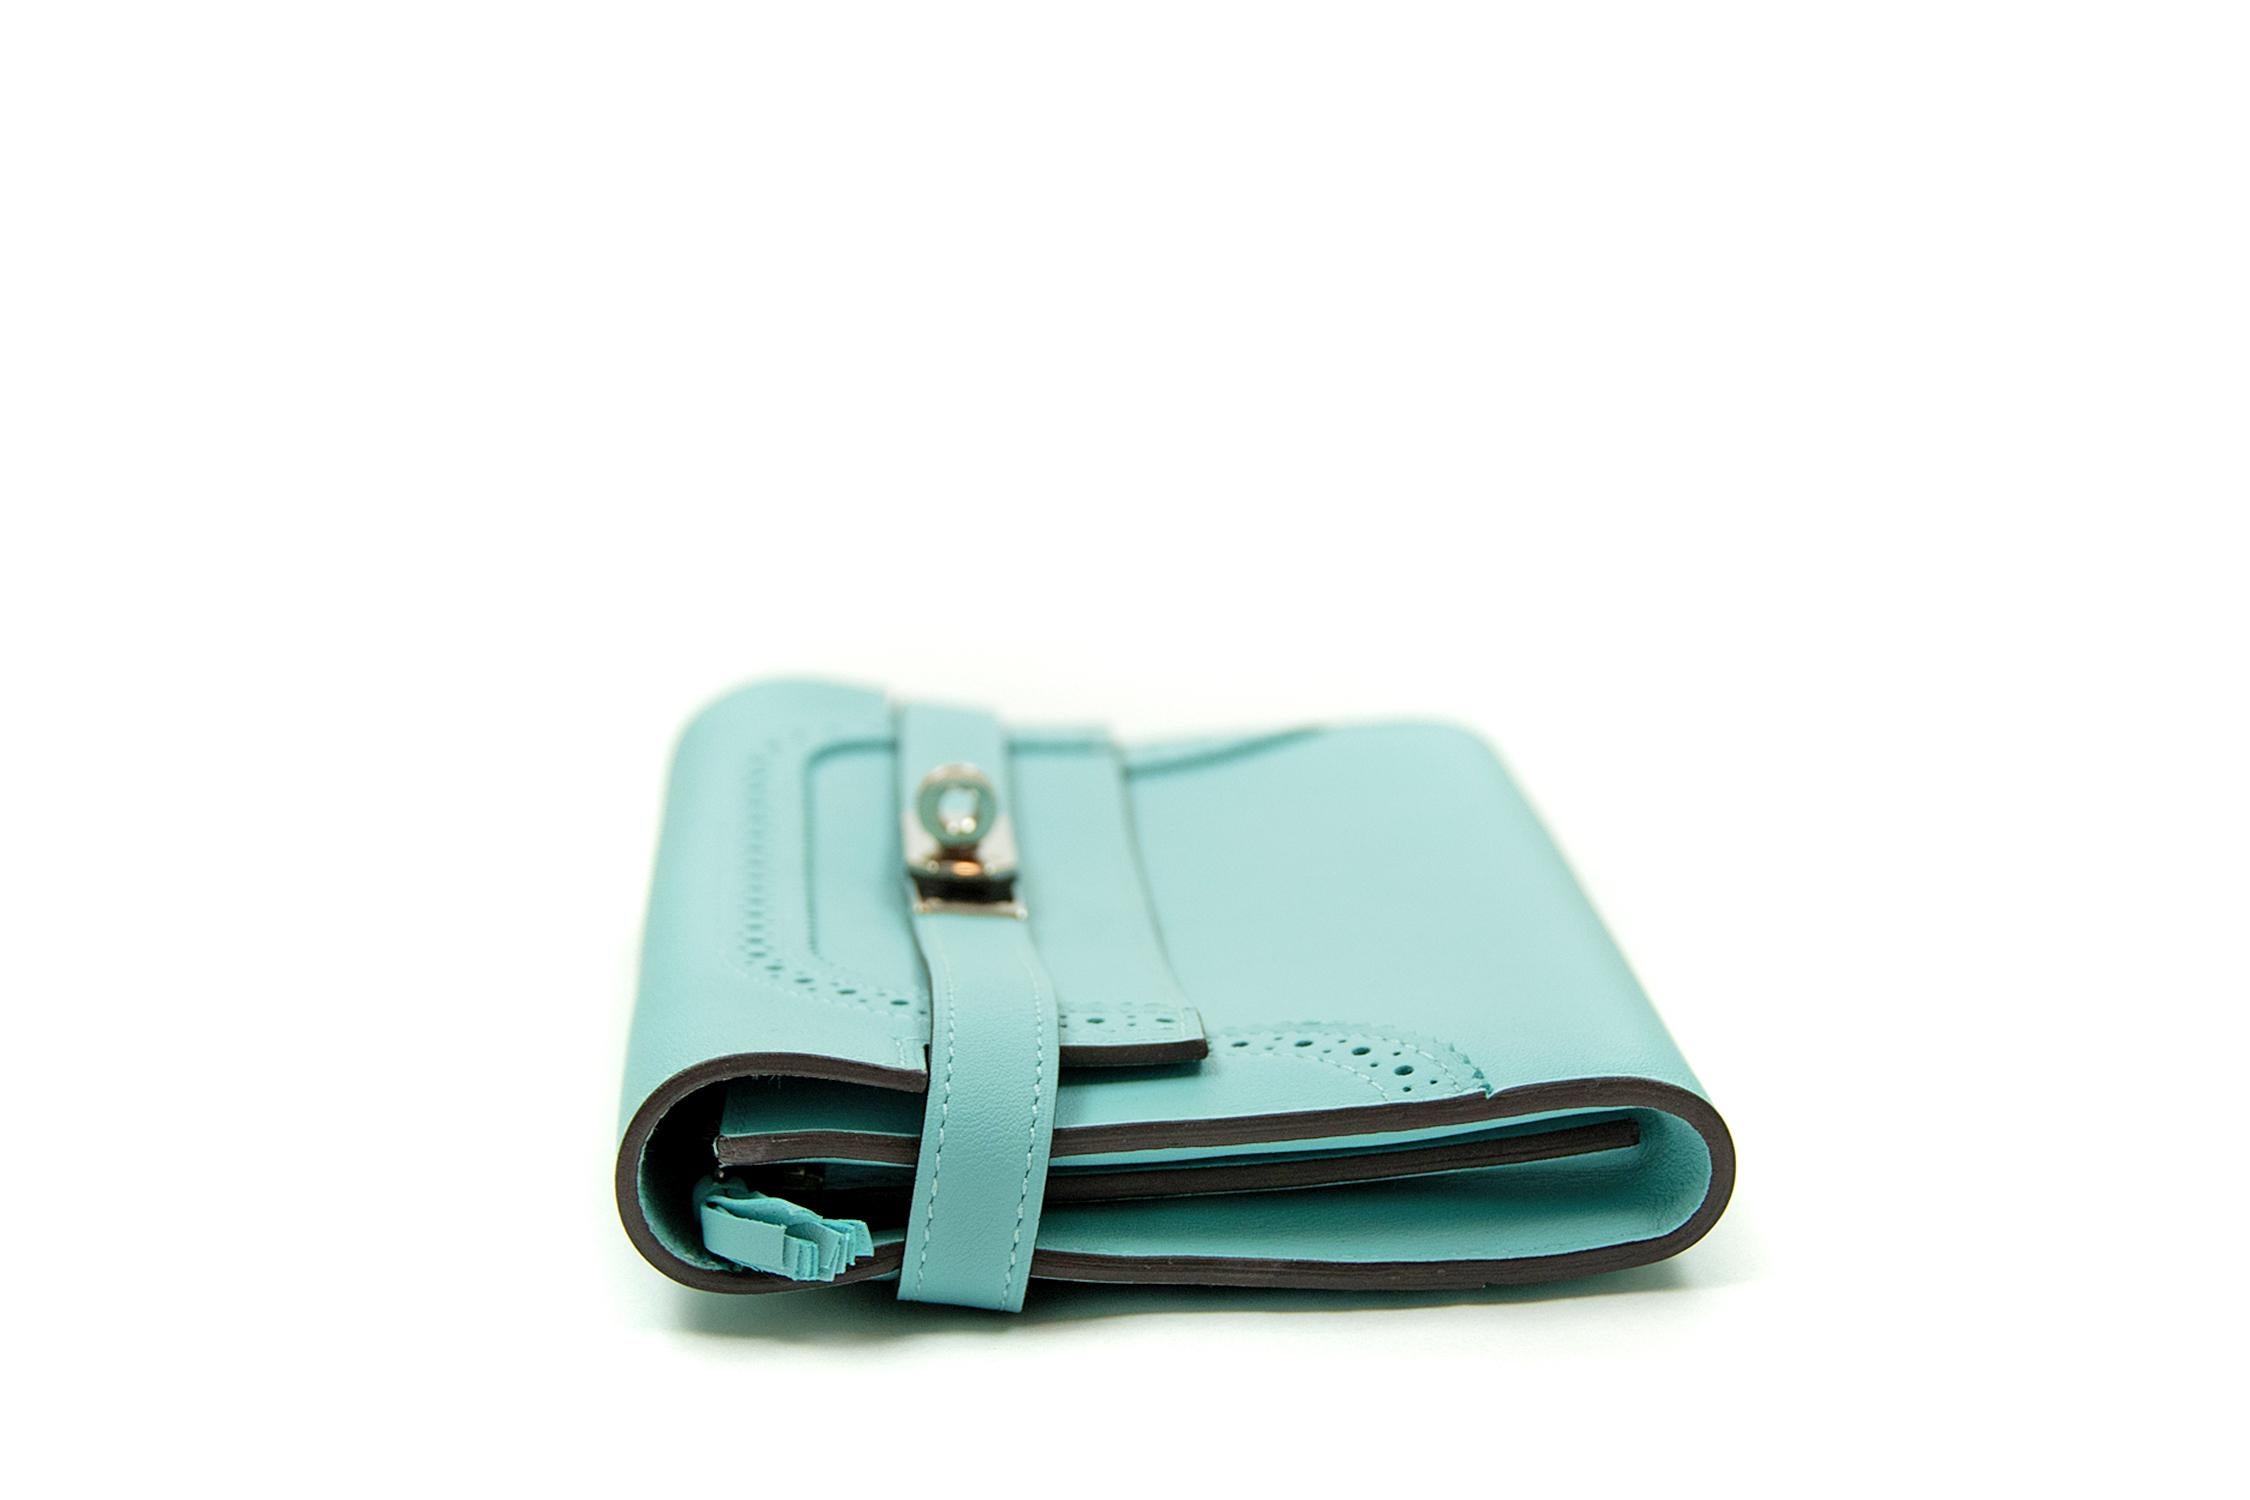 Hermes Kelly Ghillies Wallet in Veau Swift Blue Atoll. This iconic special order Hermes wallet is timeless and chic. Fresh and crisp with palladium hardware. 

    Condition: New or Never Used
    Made in France
    Comes with Signature Hermes Box
